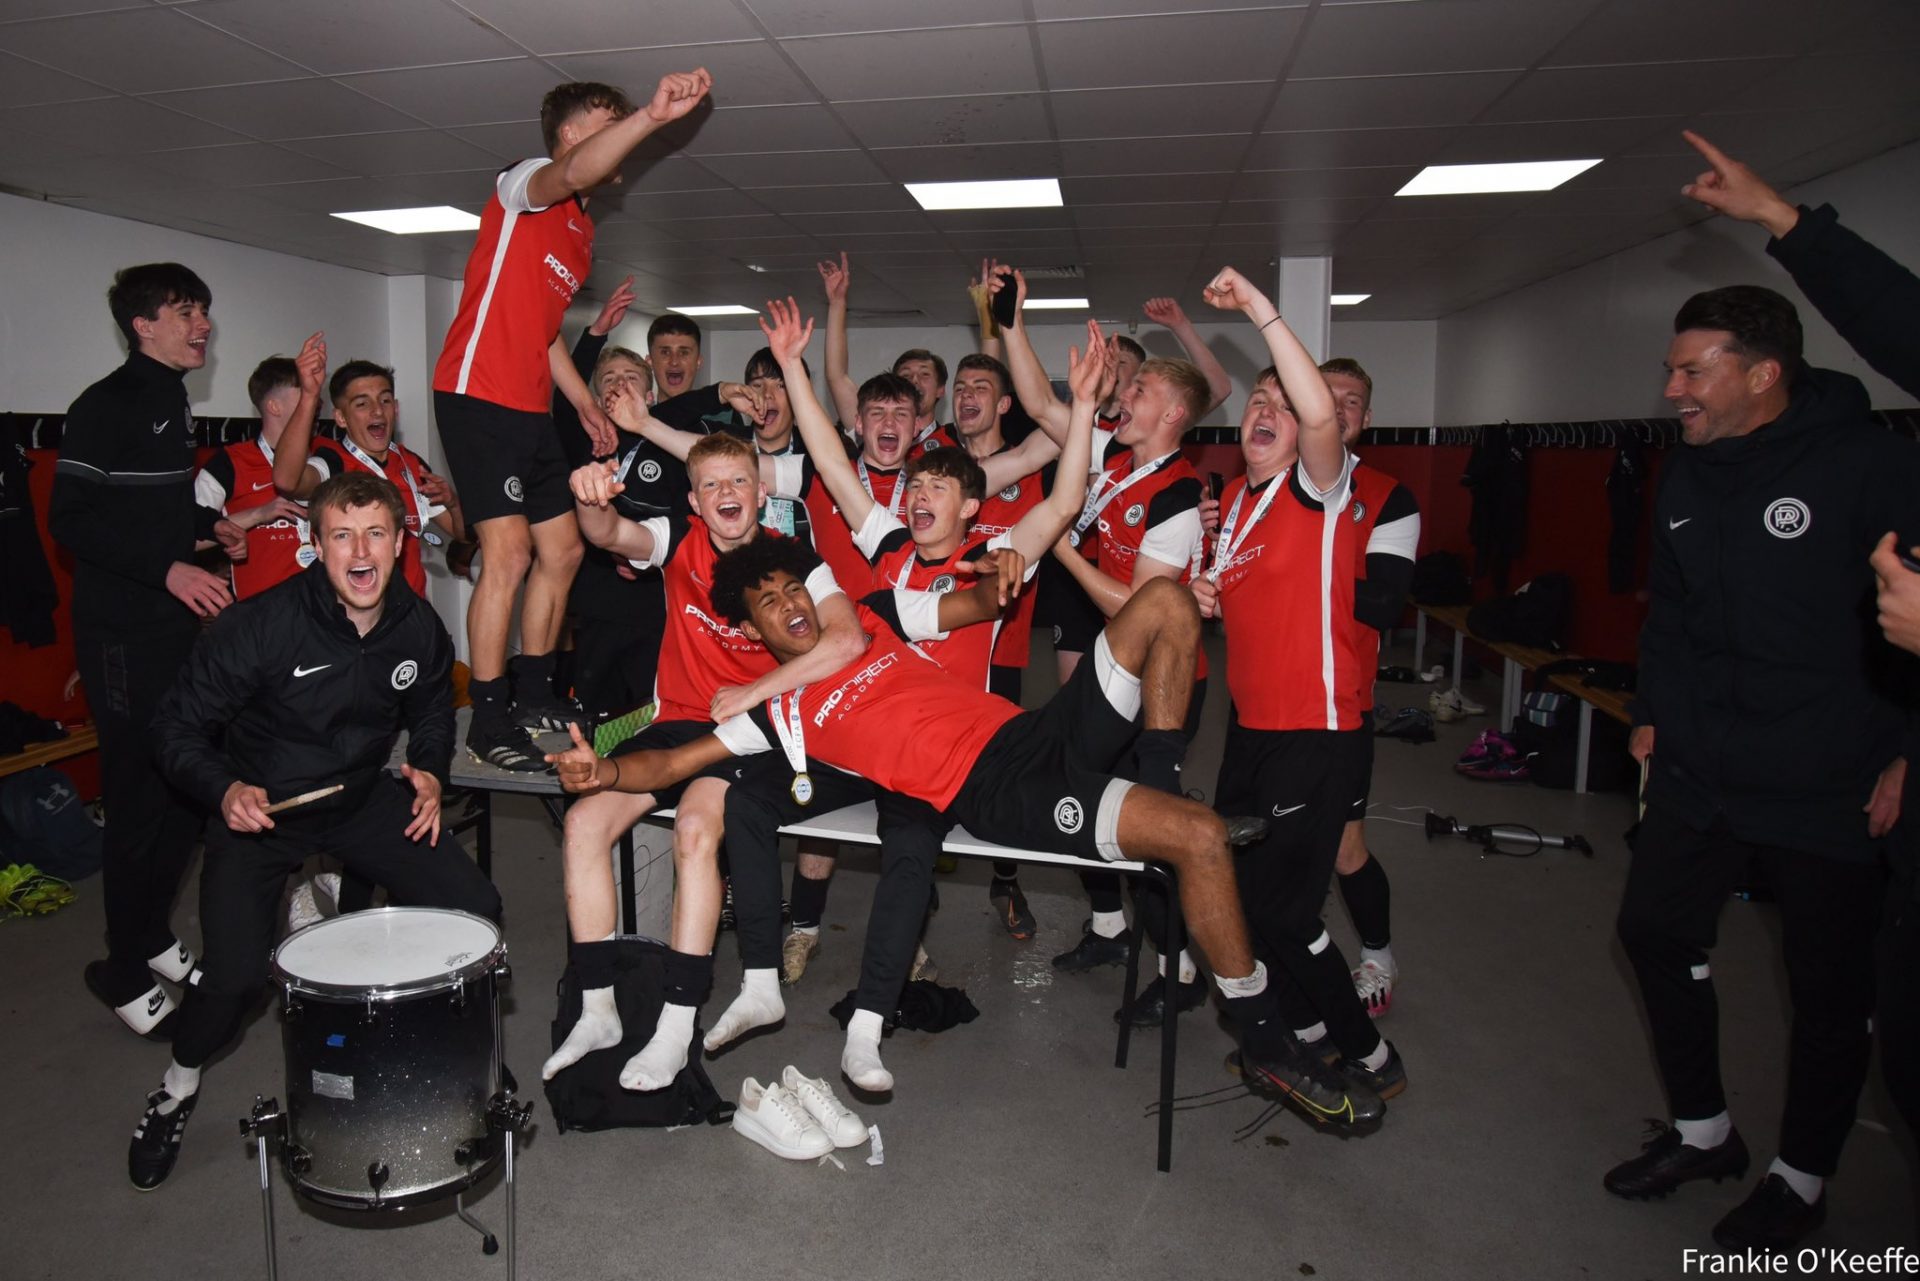 Pro:Direct Academy 1st squad celebrating victory at English College FA premier cup final